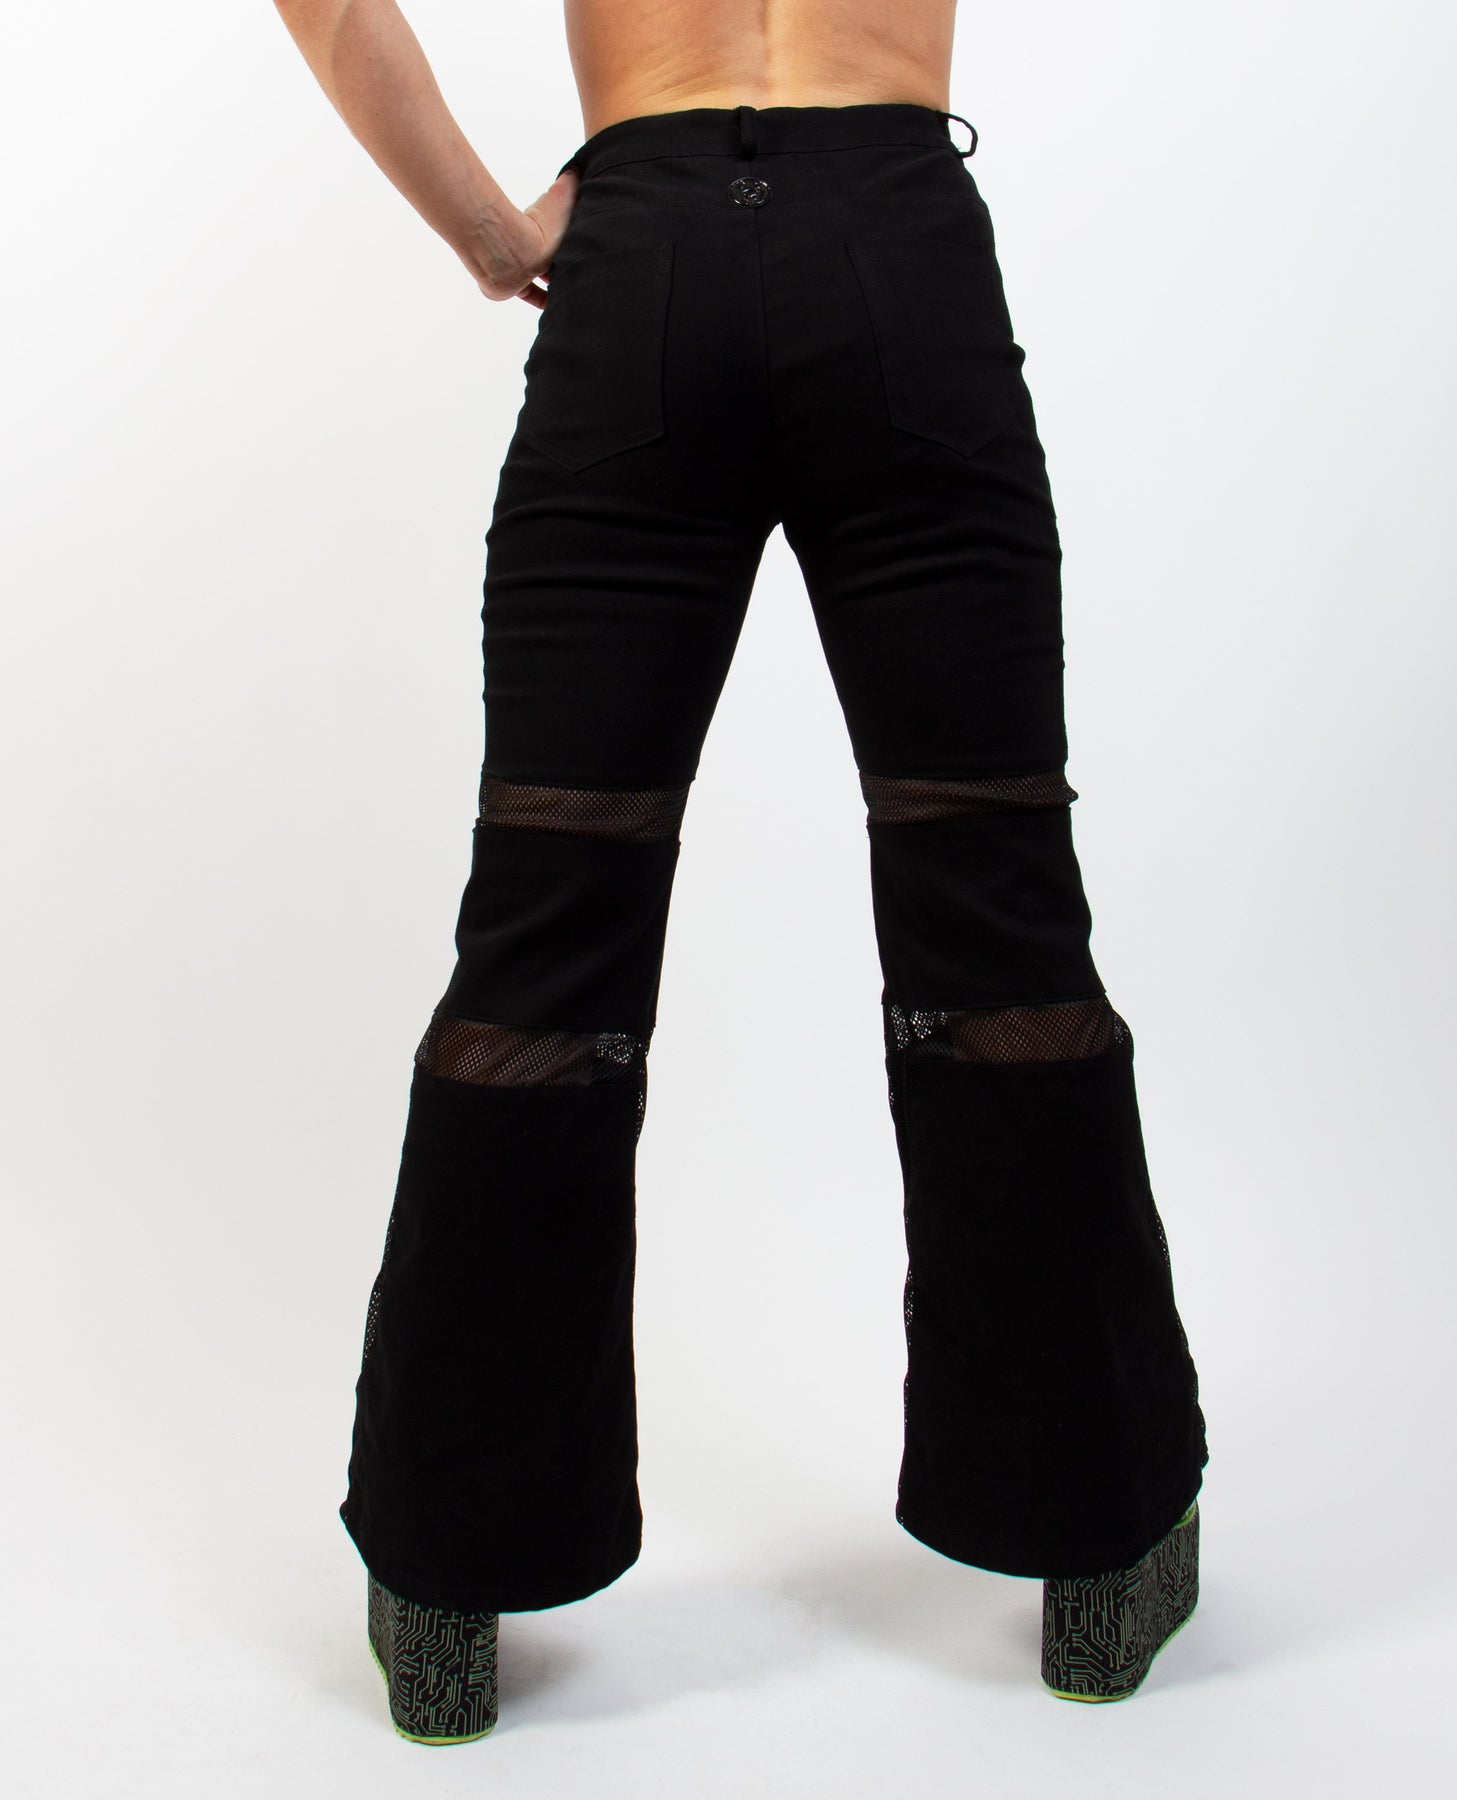 PROTECTION FLARES | Cyberdog London by Cyberdog - Rave clothing ...